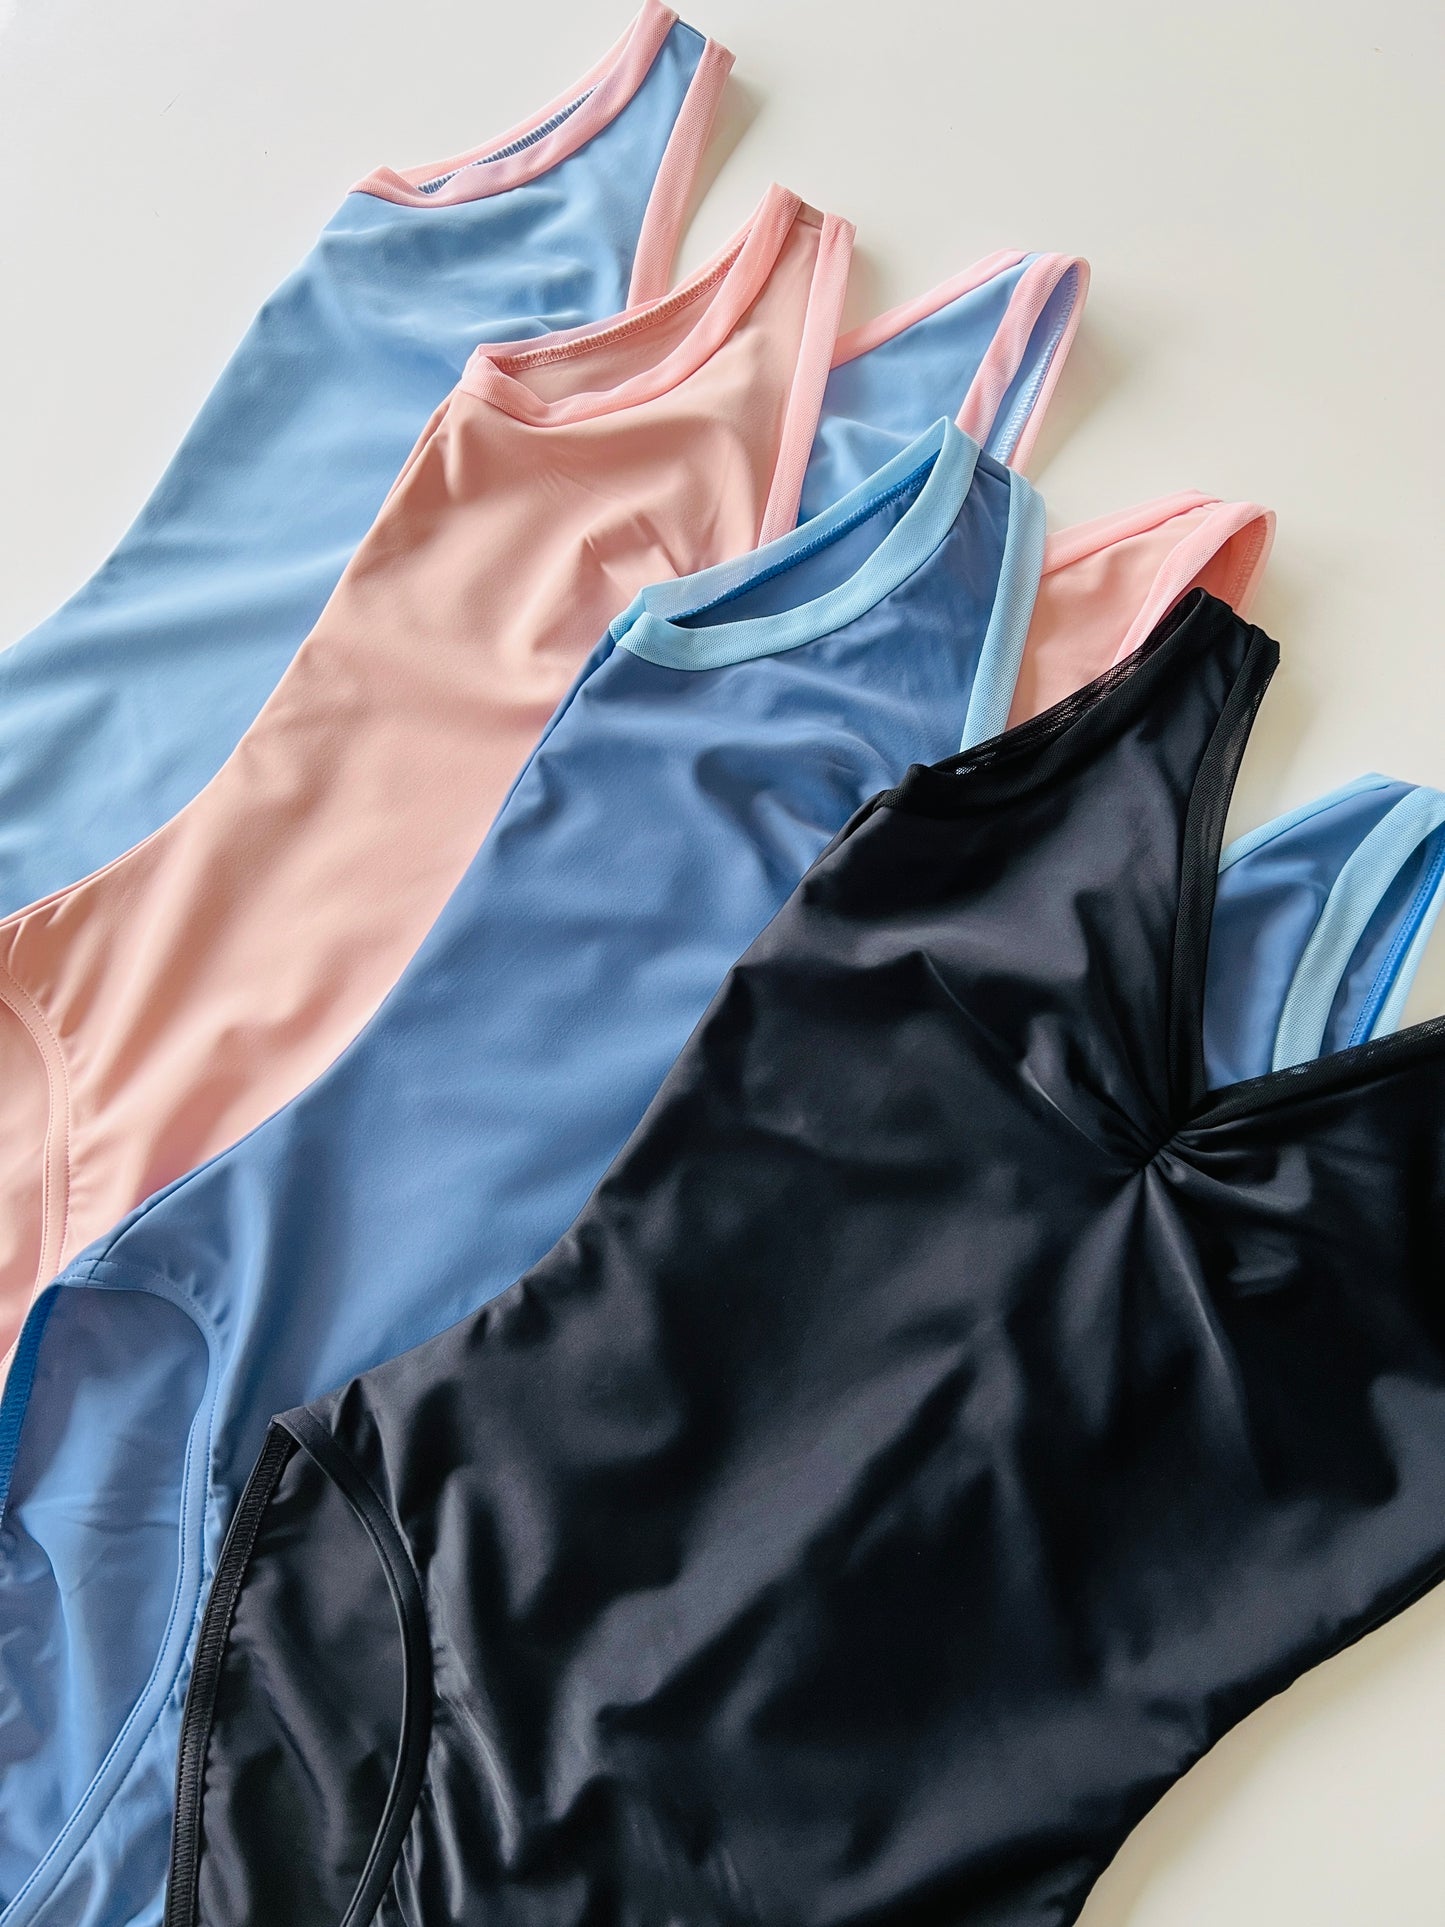 Sophia ballet leotard from Sonata Dancewear in four different colours sold by The Collective Dancewear